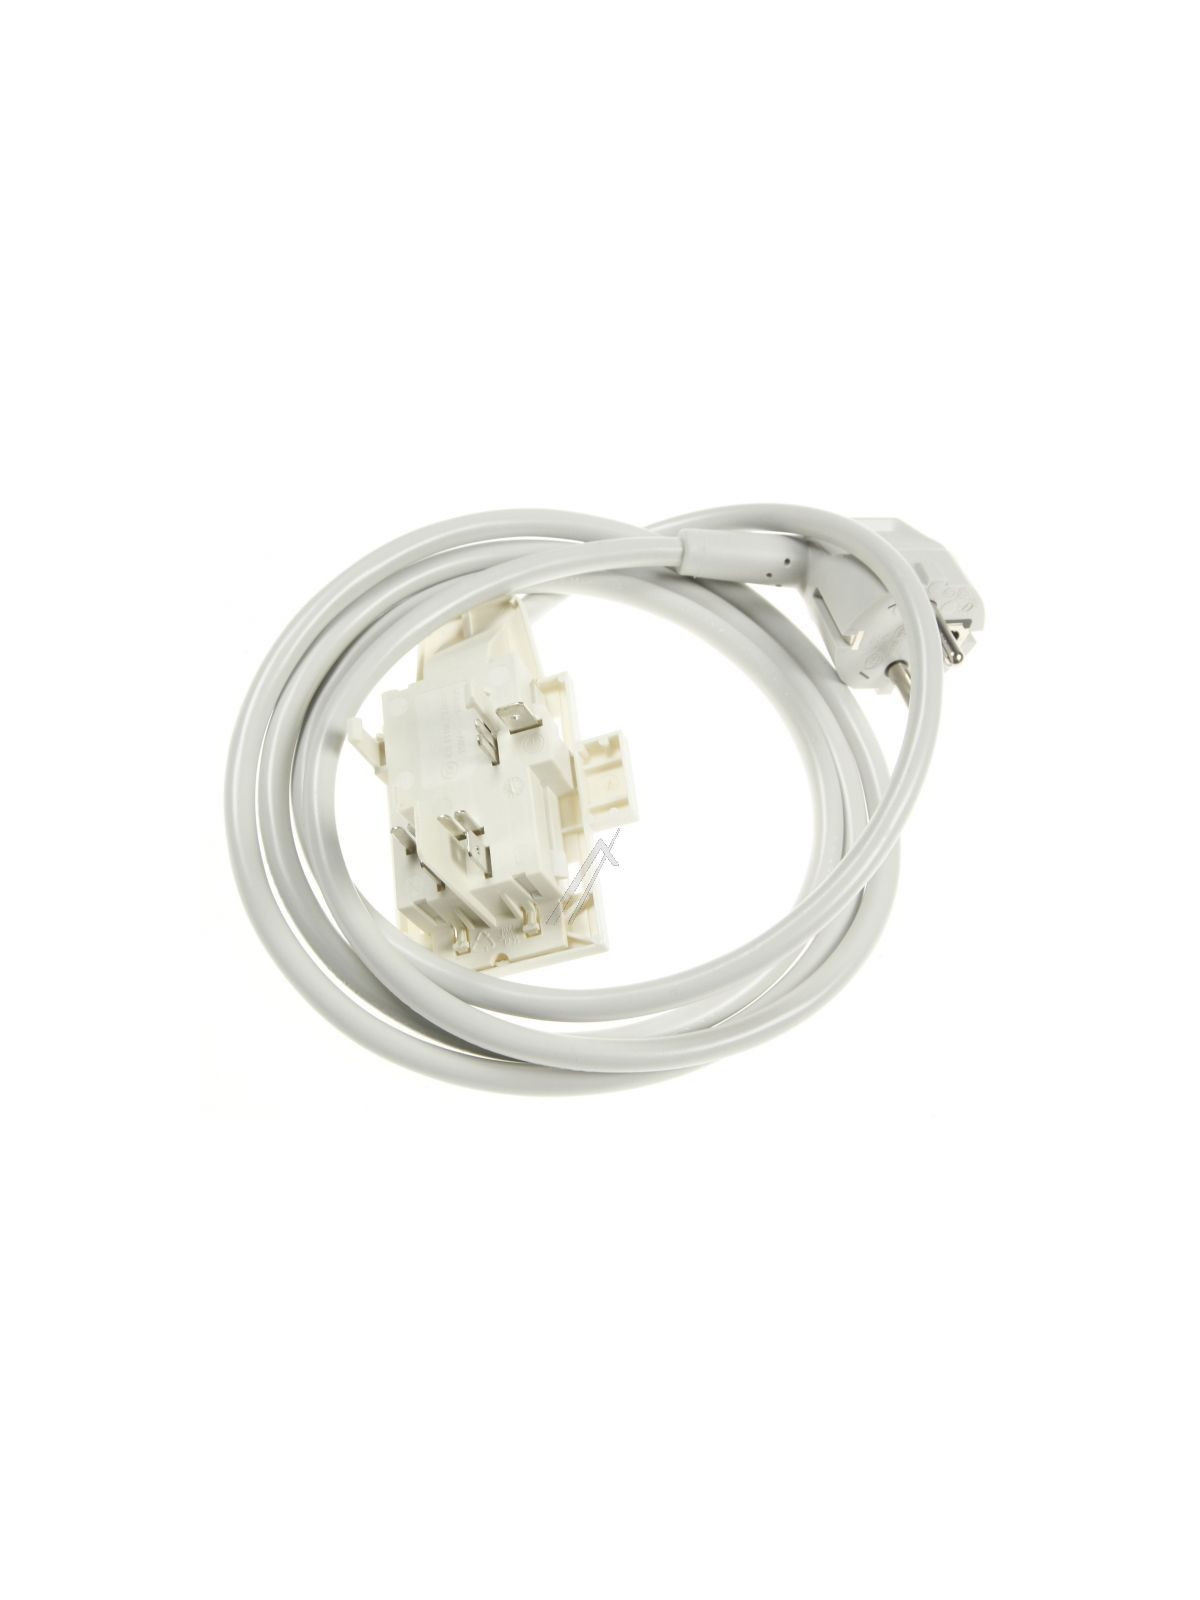 Cable alimentation Bosch - Siemens SMS2066